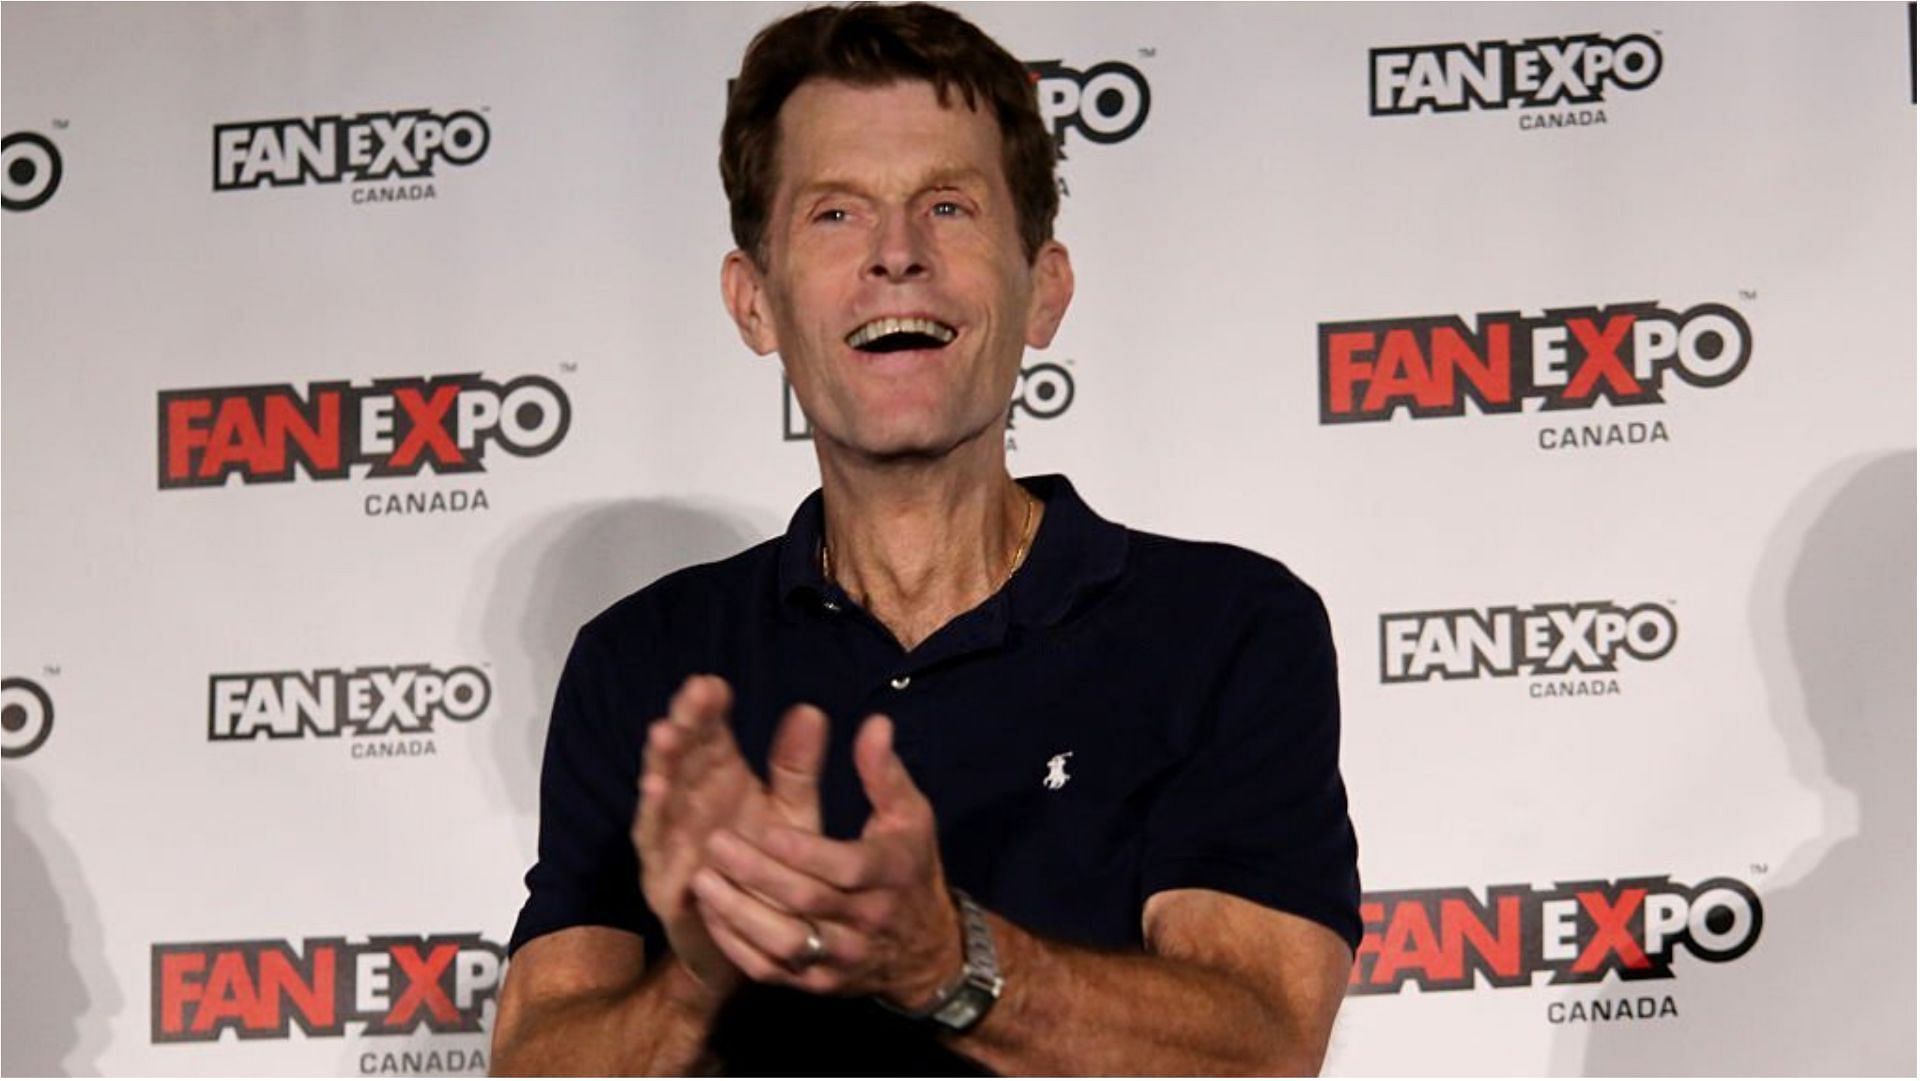 Kevin Conroy portrayed Batman in various video games, TV shows and films (Image via Isaiah Trickey/Getty Images)